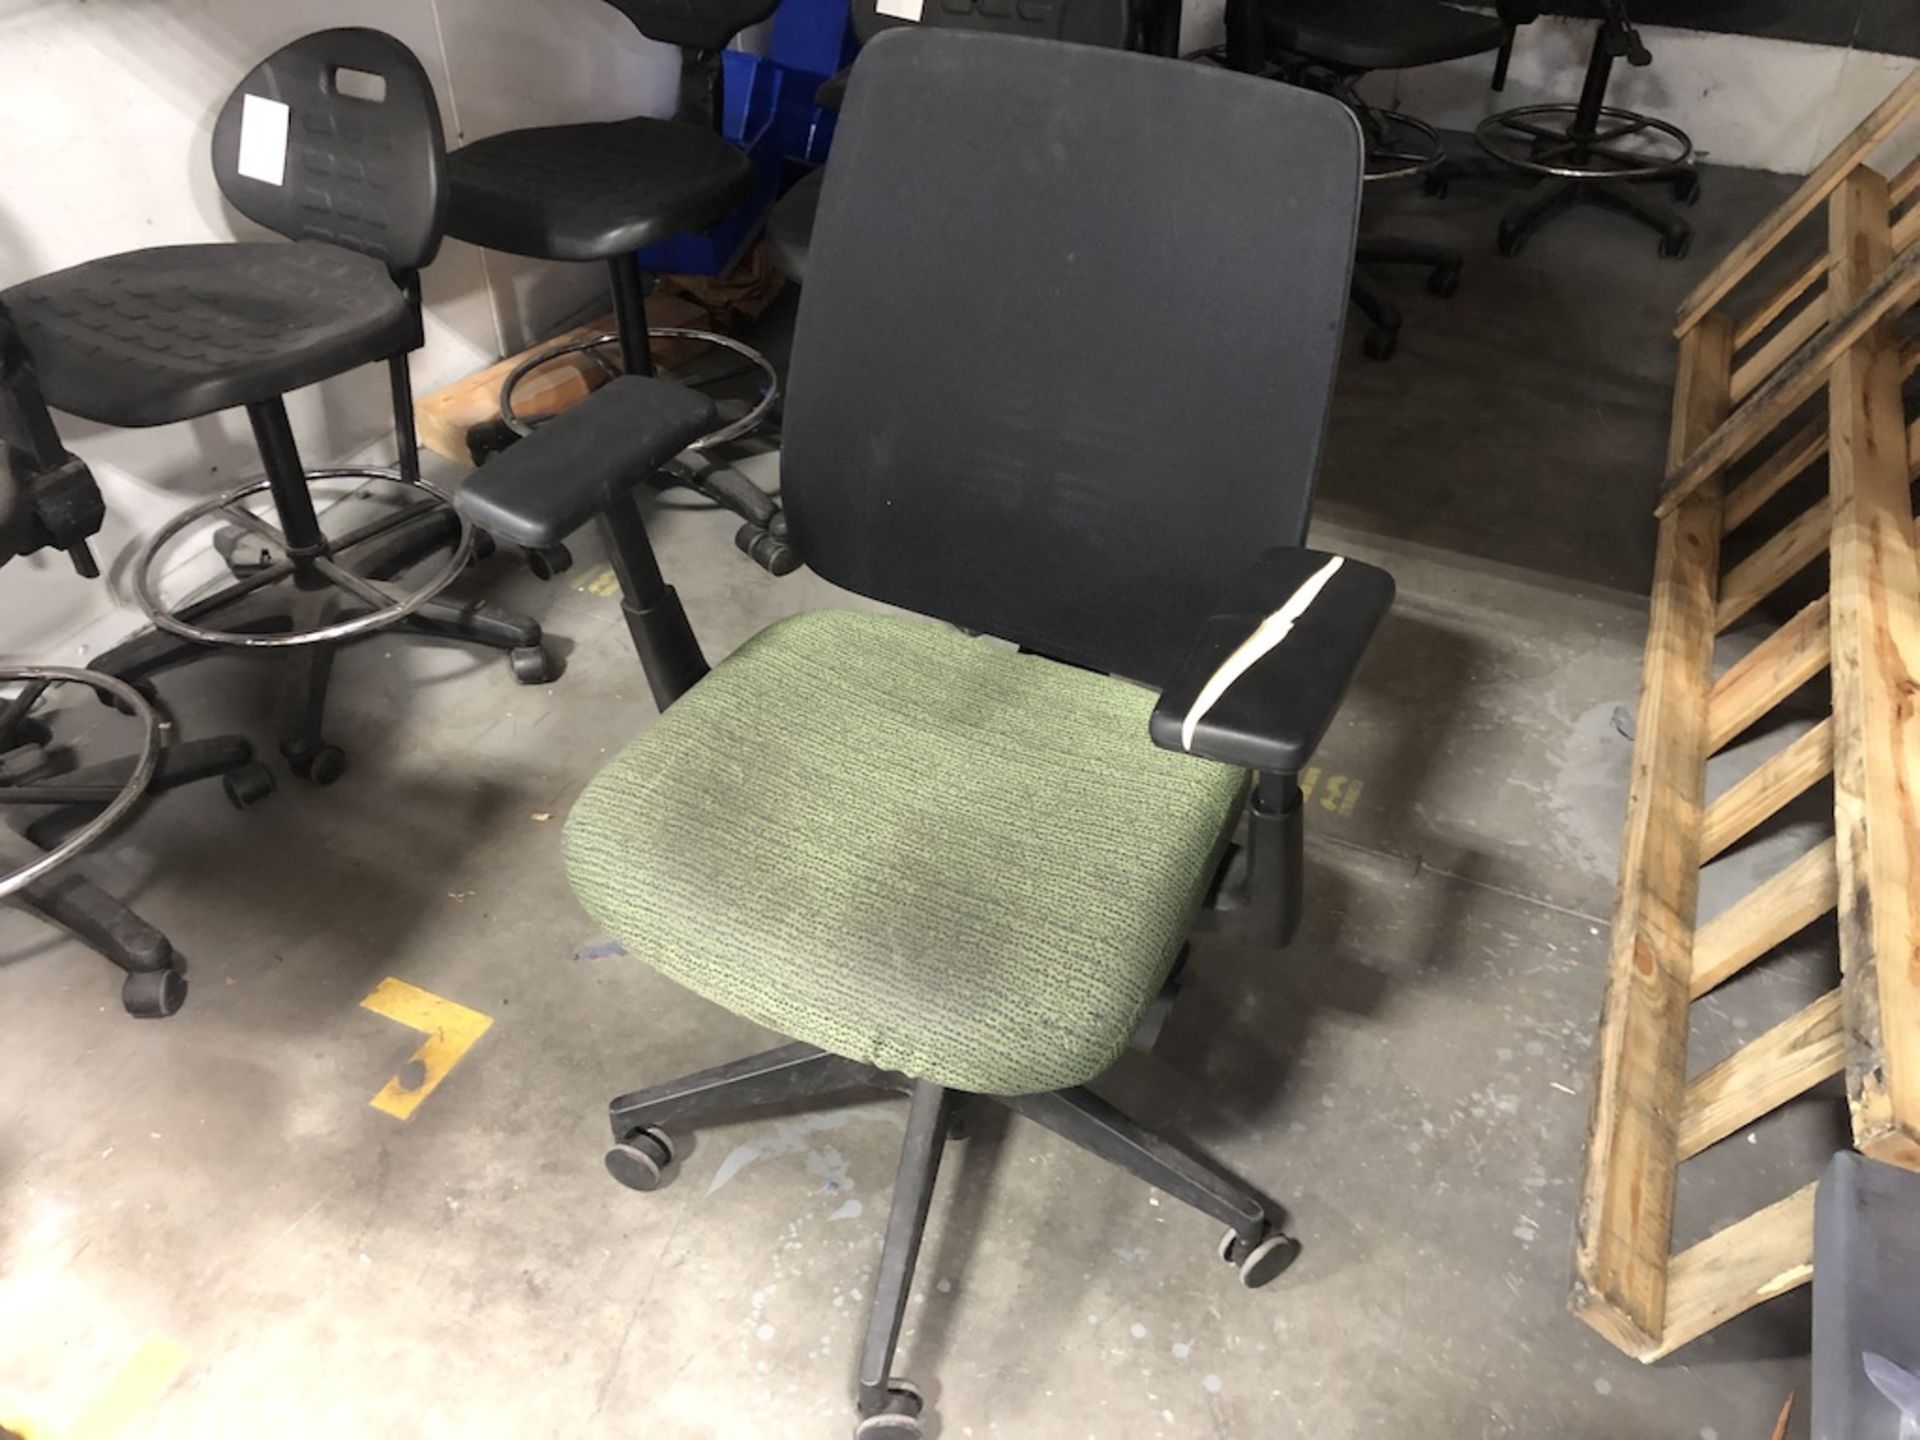 5 CASTER OFFICE CHAIR GREEN SEAT CUSHION, PADDED ARM REST ( SPLIT ), BLACK MESH BACK SUPPORT - Image 3 of 3